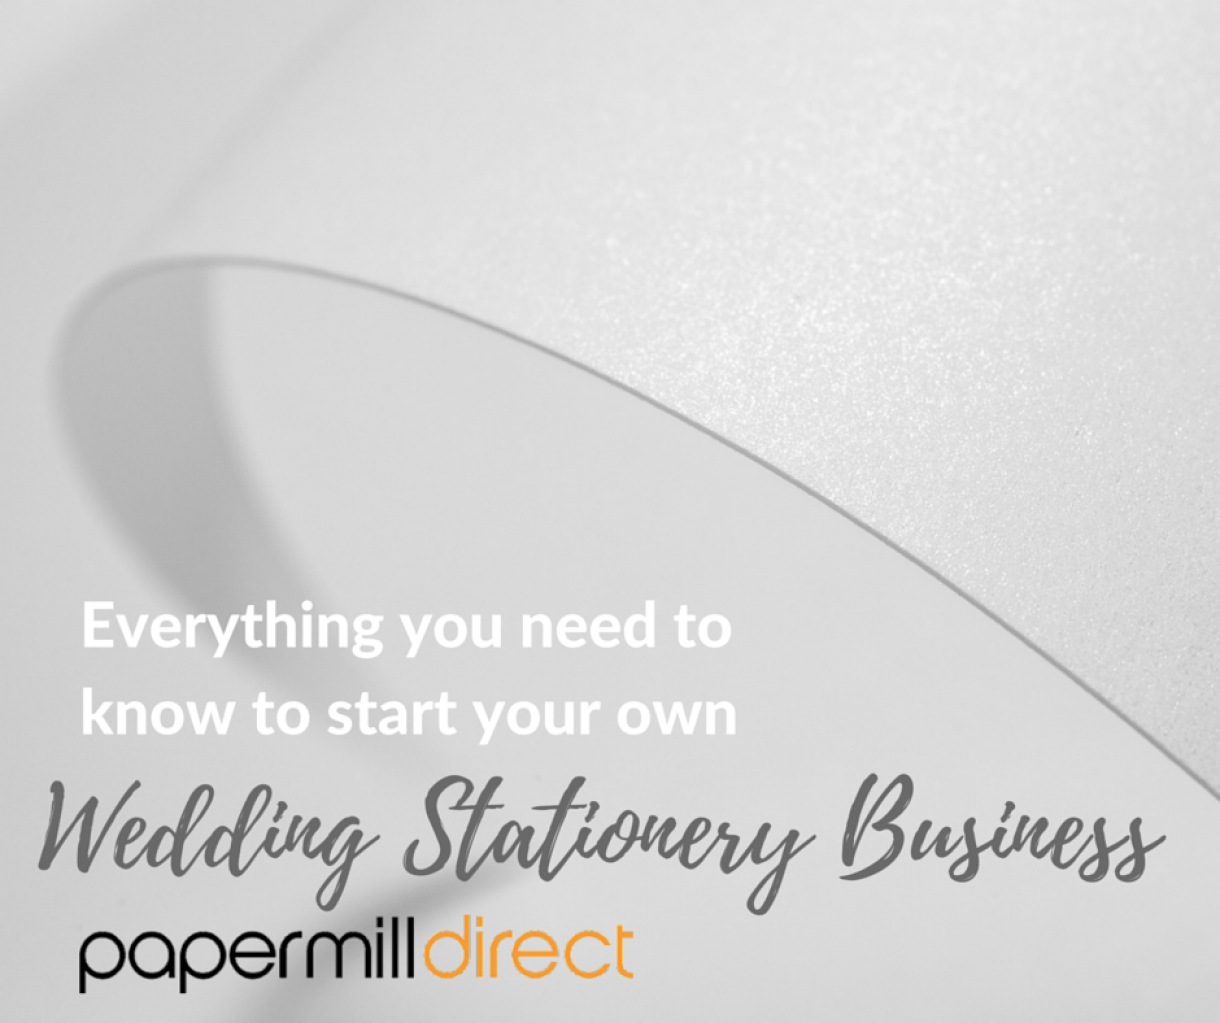 Everything You Need To Know To Start Your Own Wedding Stationery Business